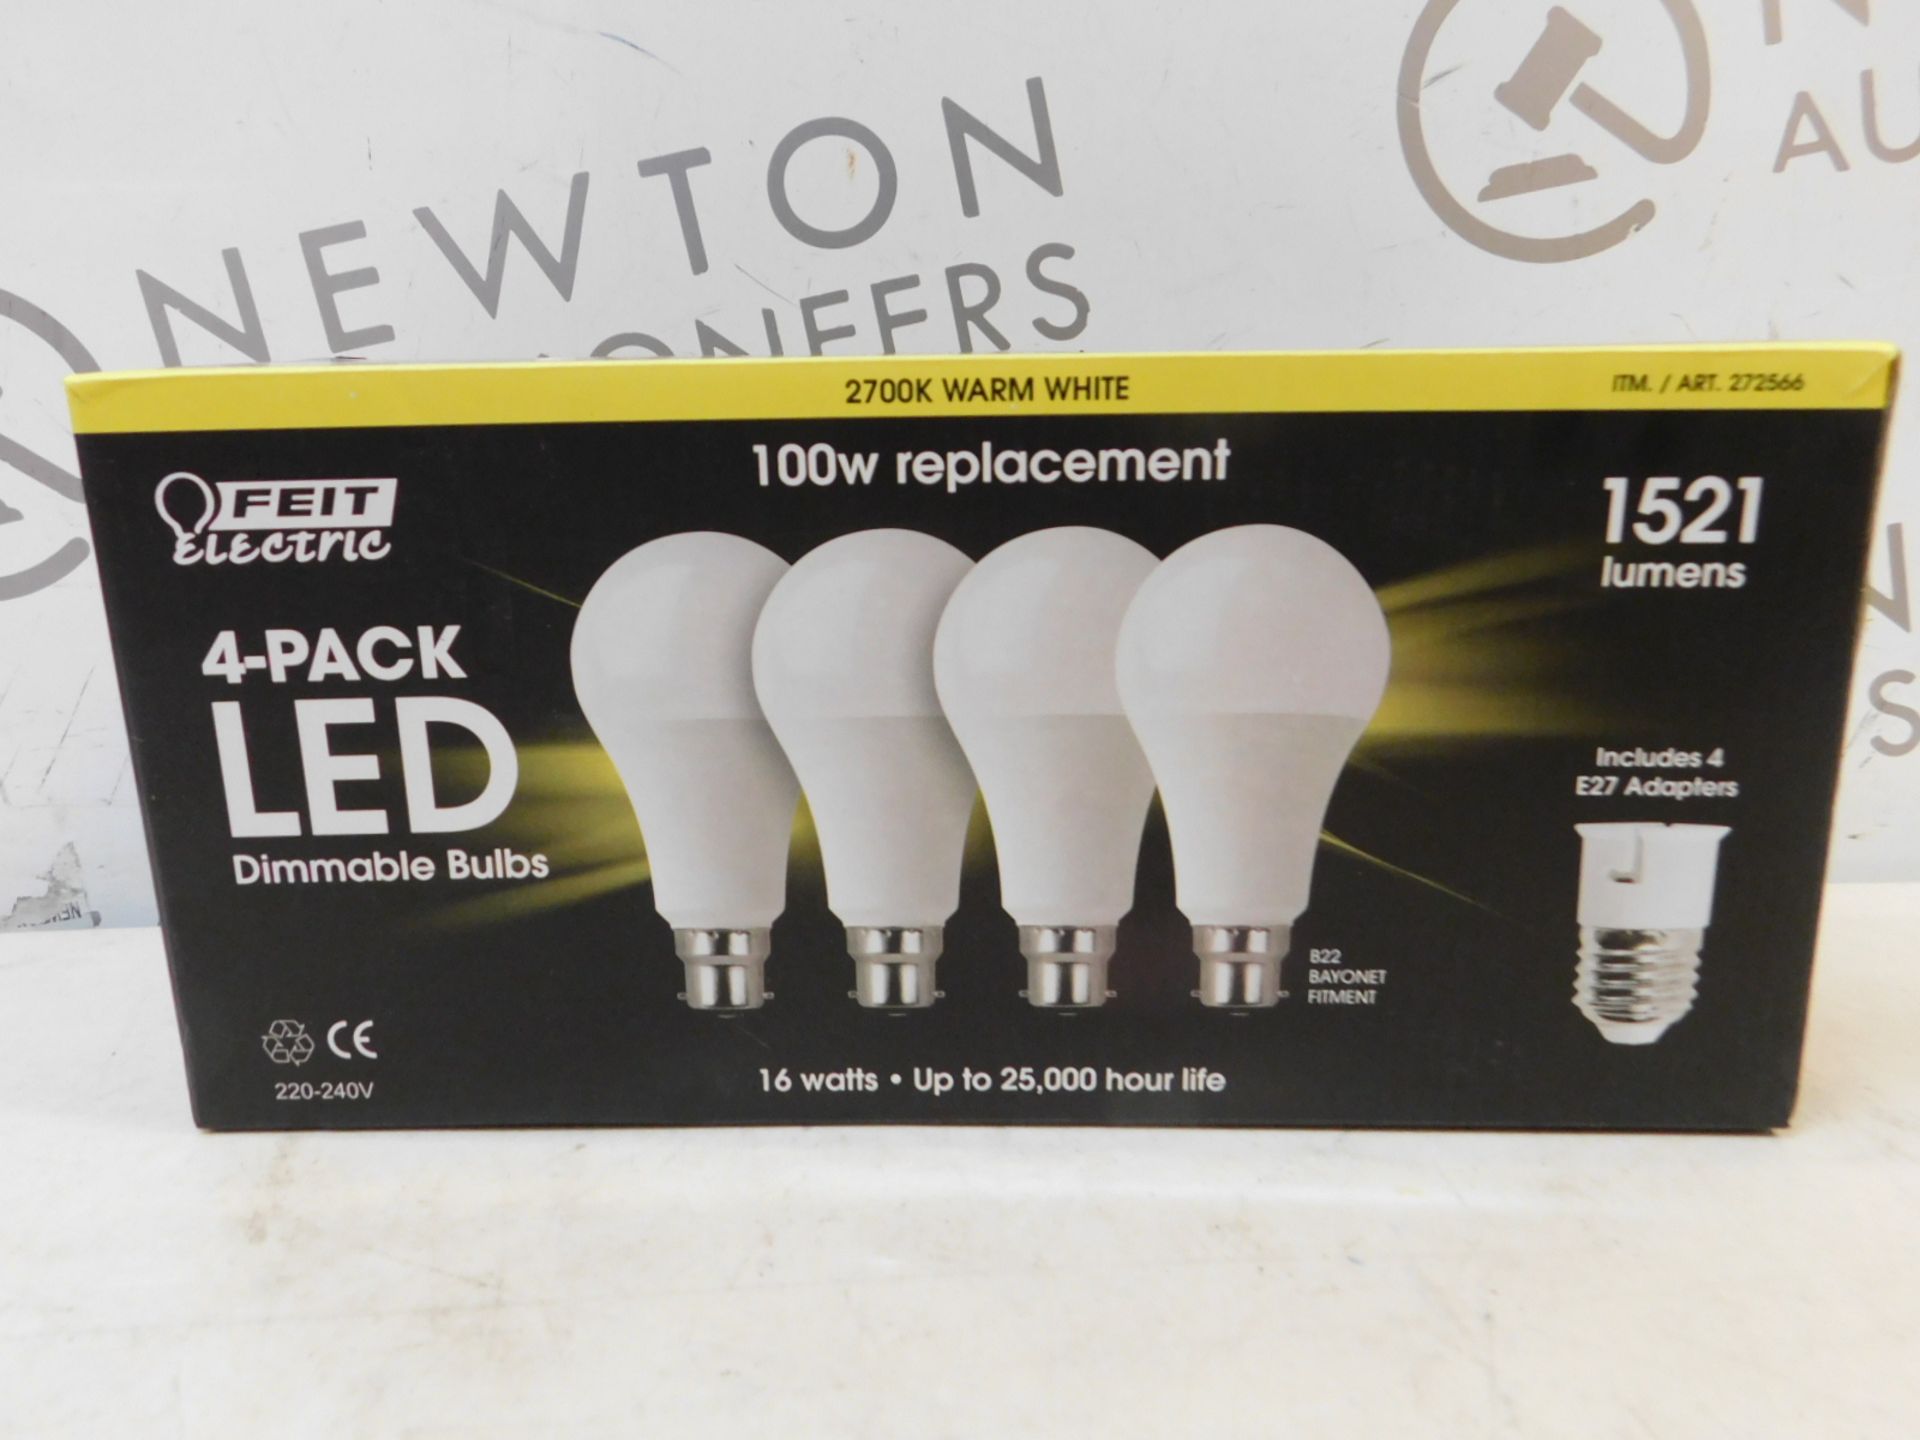 1 BOX OF 3 FEIT ELECTRIC LED DIMMABLE 100W REPLACEMENT BULBS RRP Â£19.99